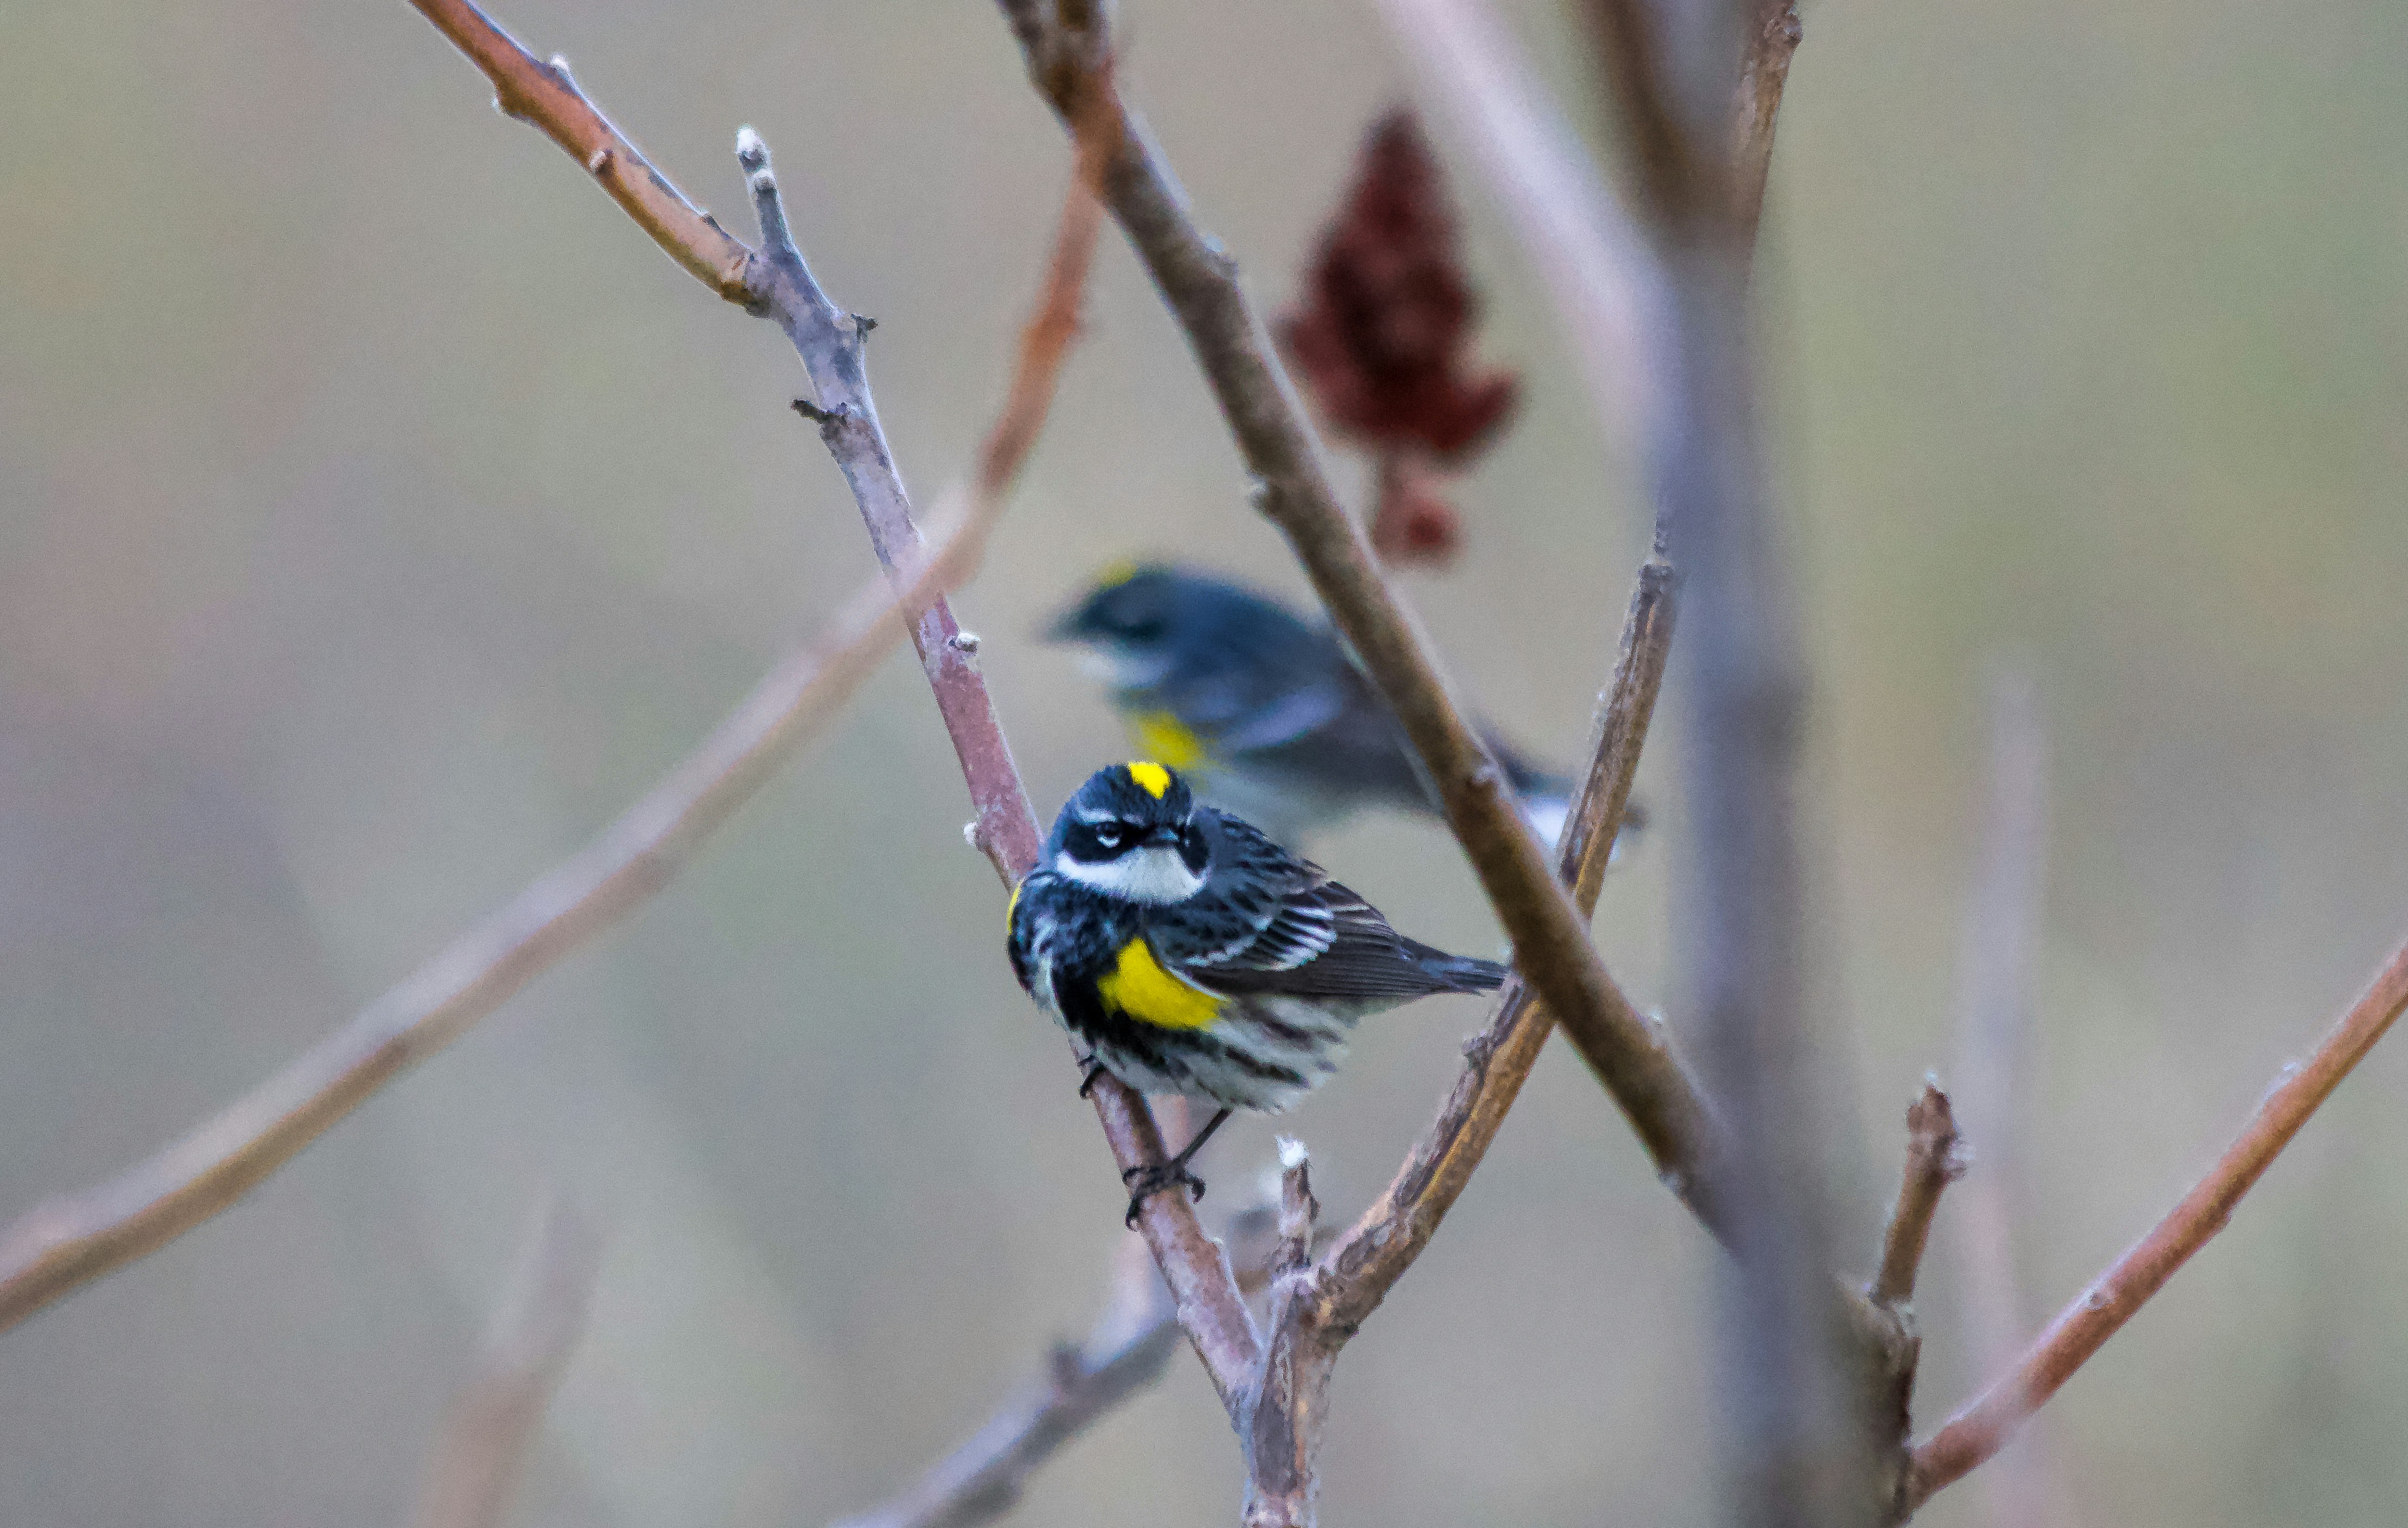 A yellow-rumped warbler seen atop Mount Agamenticus in York, Maine during the Spring Migration. Warblers are some of the most spectacular birds to watch for each year. Follow on Instagram @wildlife_by_yuri, and find more free plastic pollution photos at: https://www.wildlifebyyuri.com/free-ocean-photography